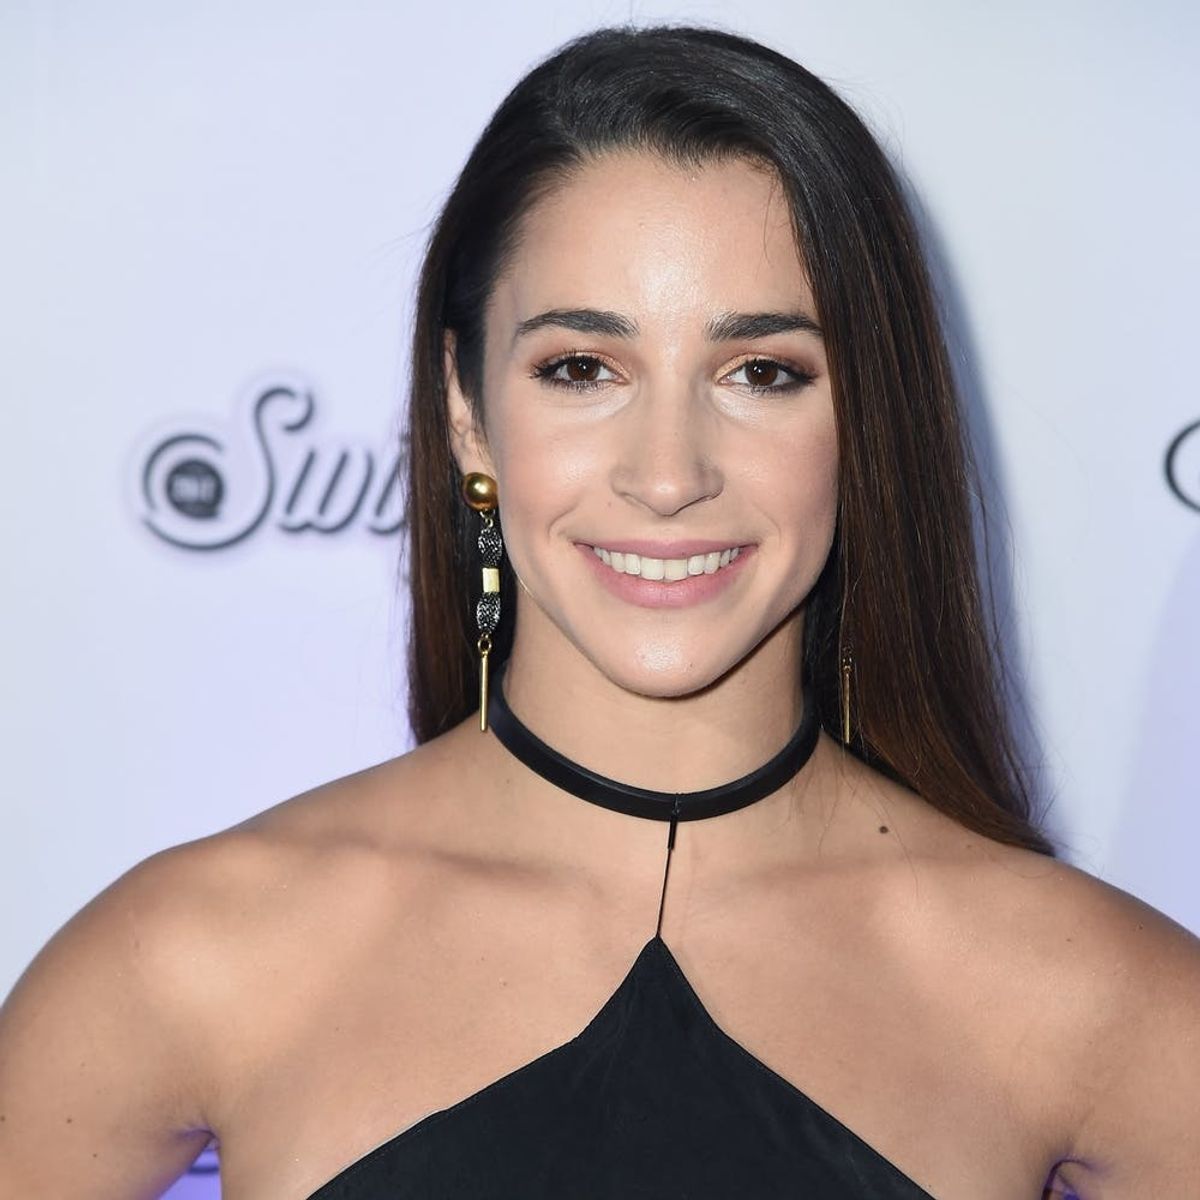 Aly Raisman’s Favorite Places to Shop Are All Super Affordable